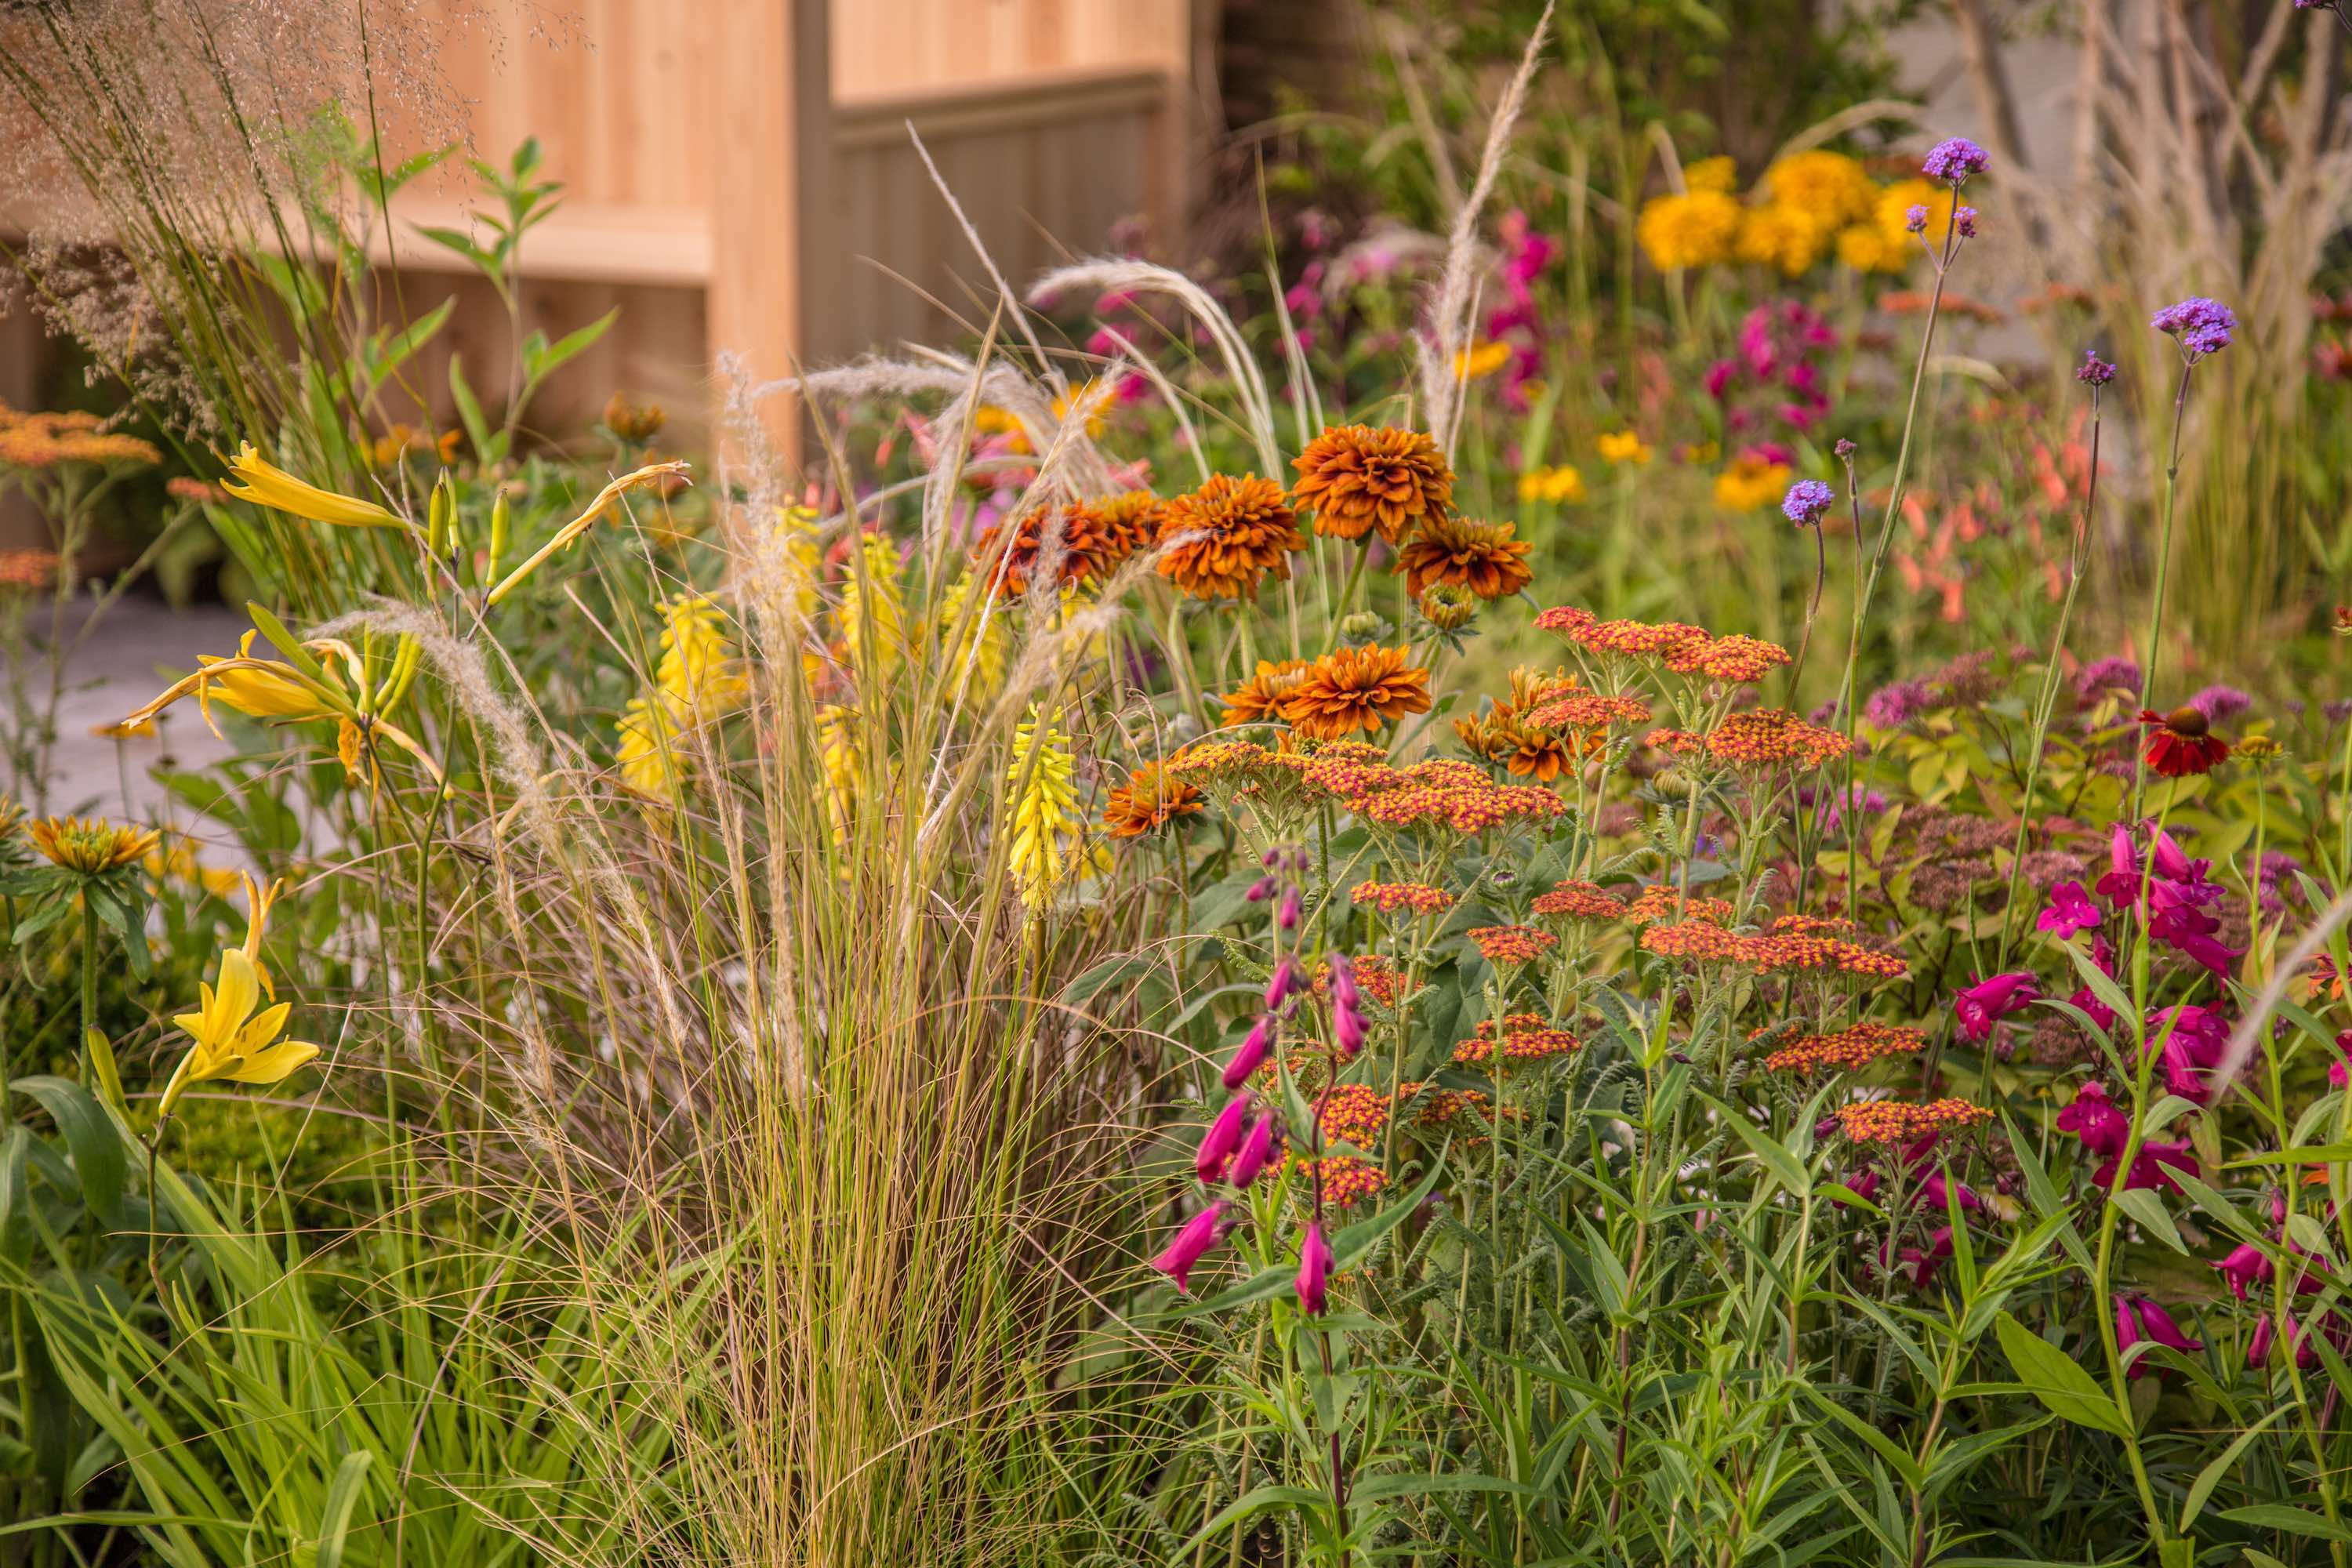 Hot Border Planting Ideas In The, Planting Ideas For Garden Borders Uk